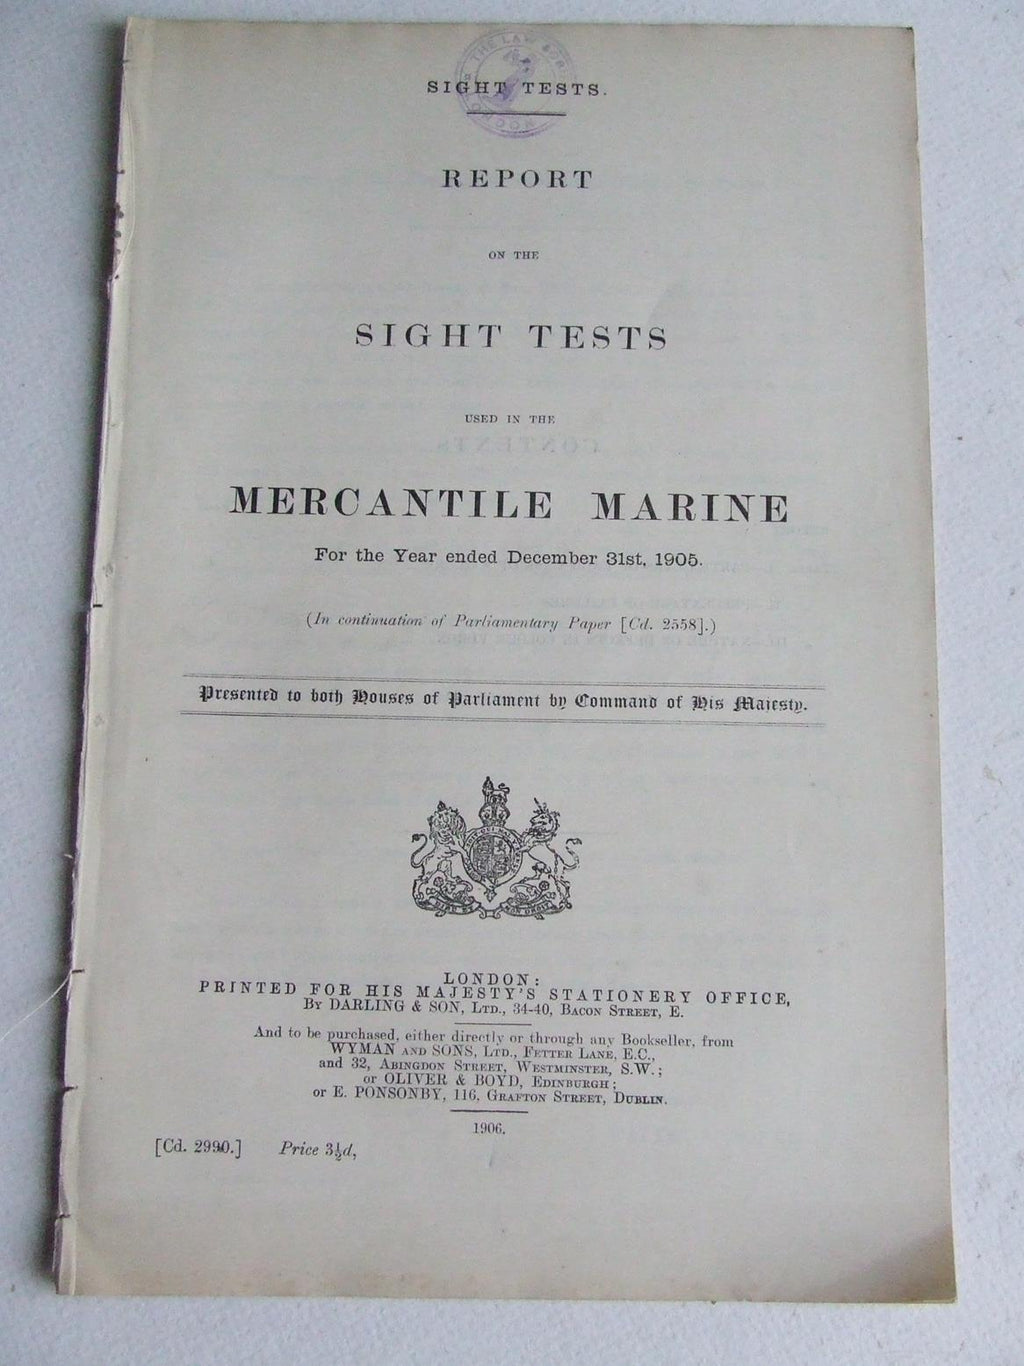 Report on the Sight Tests used in the Mercantile Marine for the year ended December 31st 1905